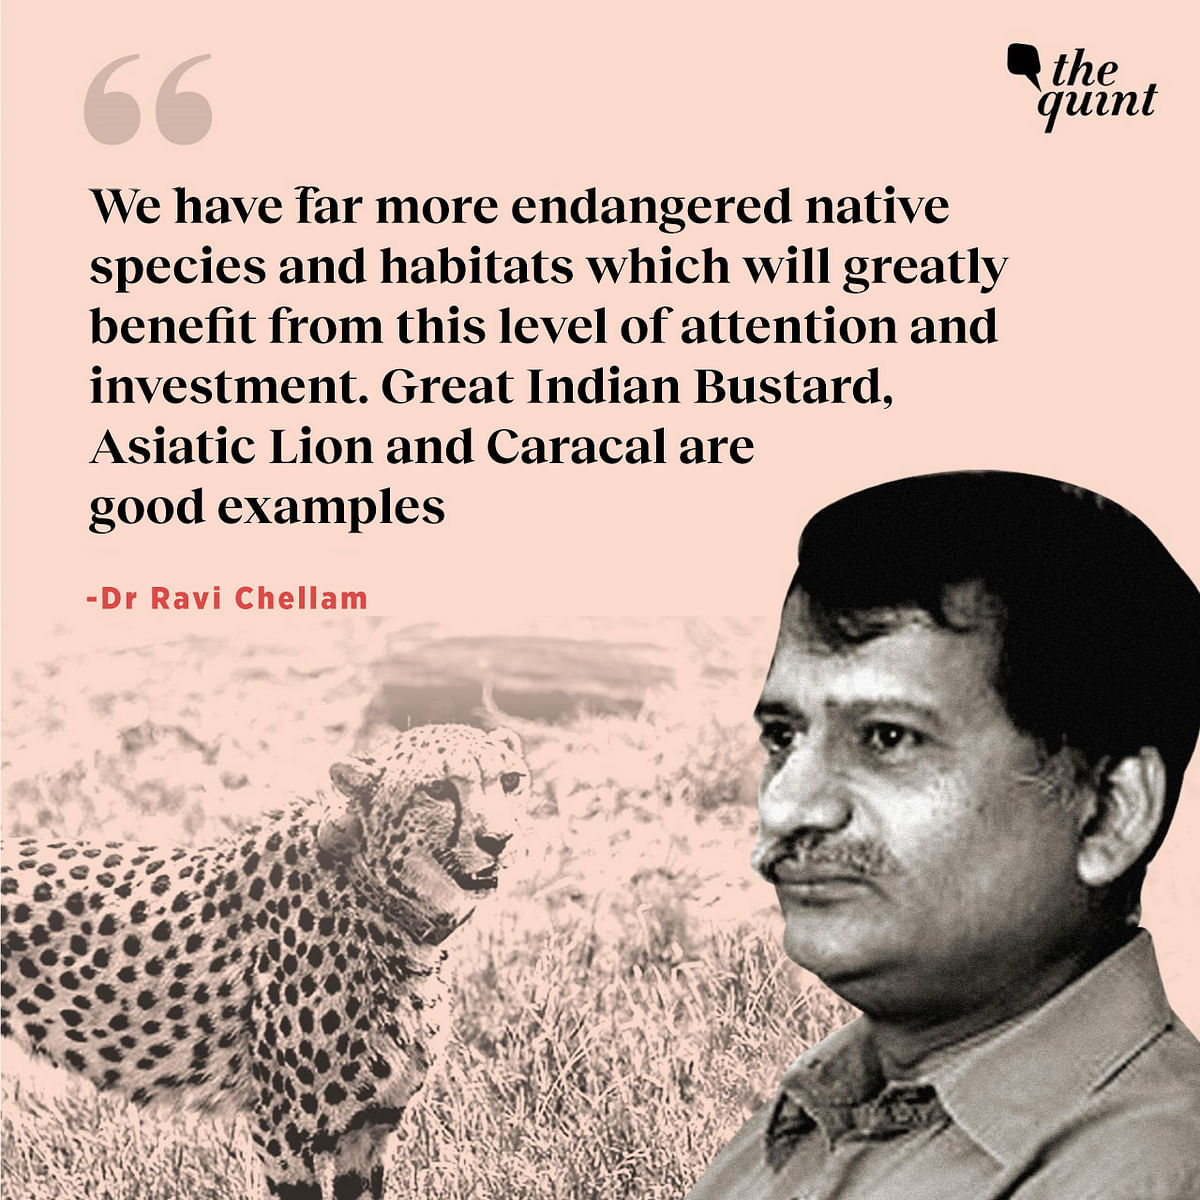 Dr Ravi Chellam speaks on the likelihood of the Cheetah Action Plan's success and more in this interview. 